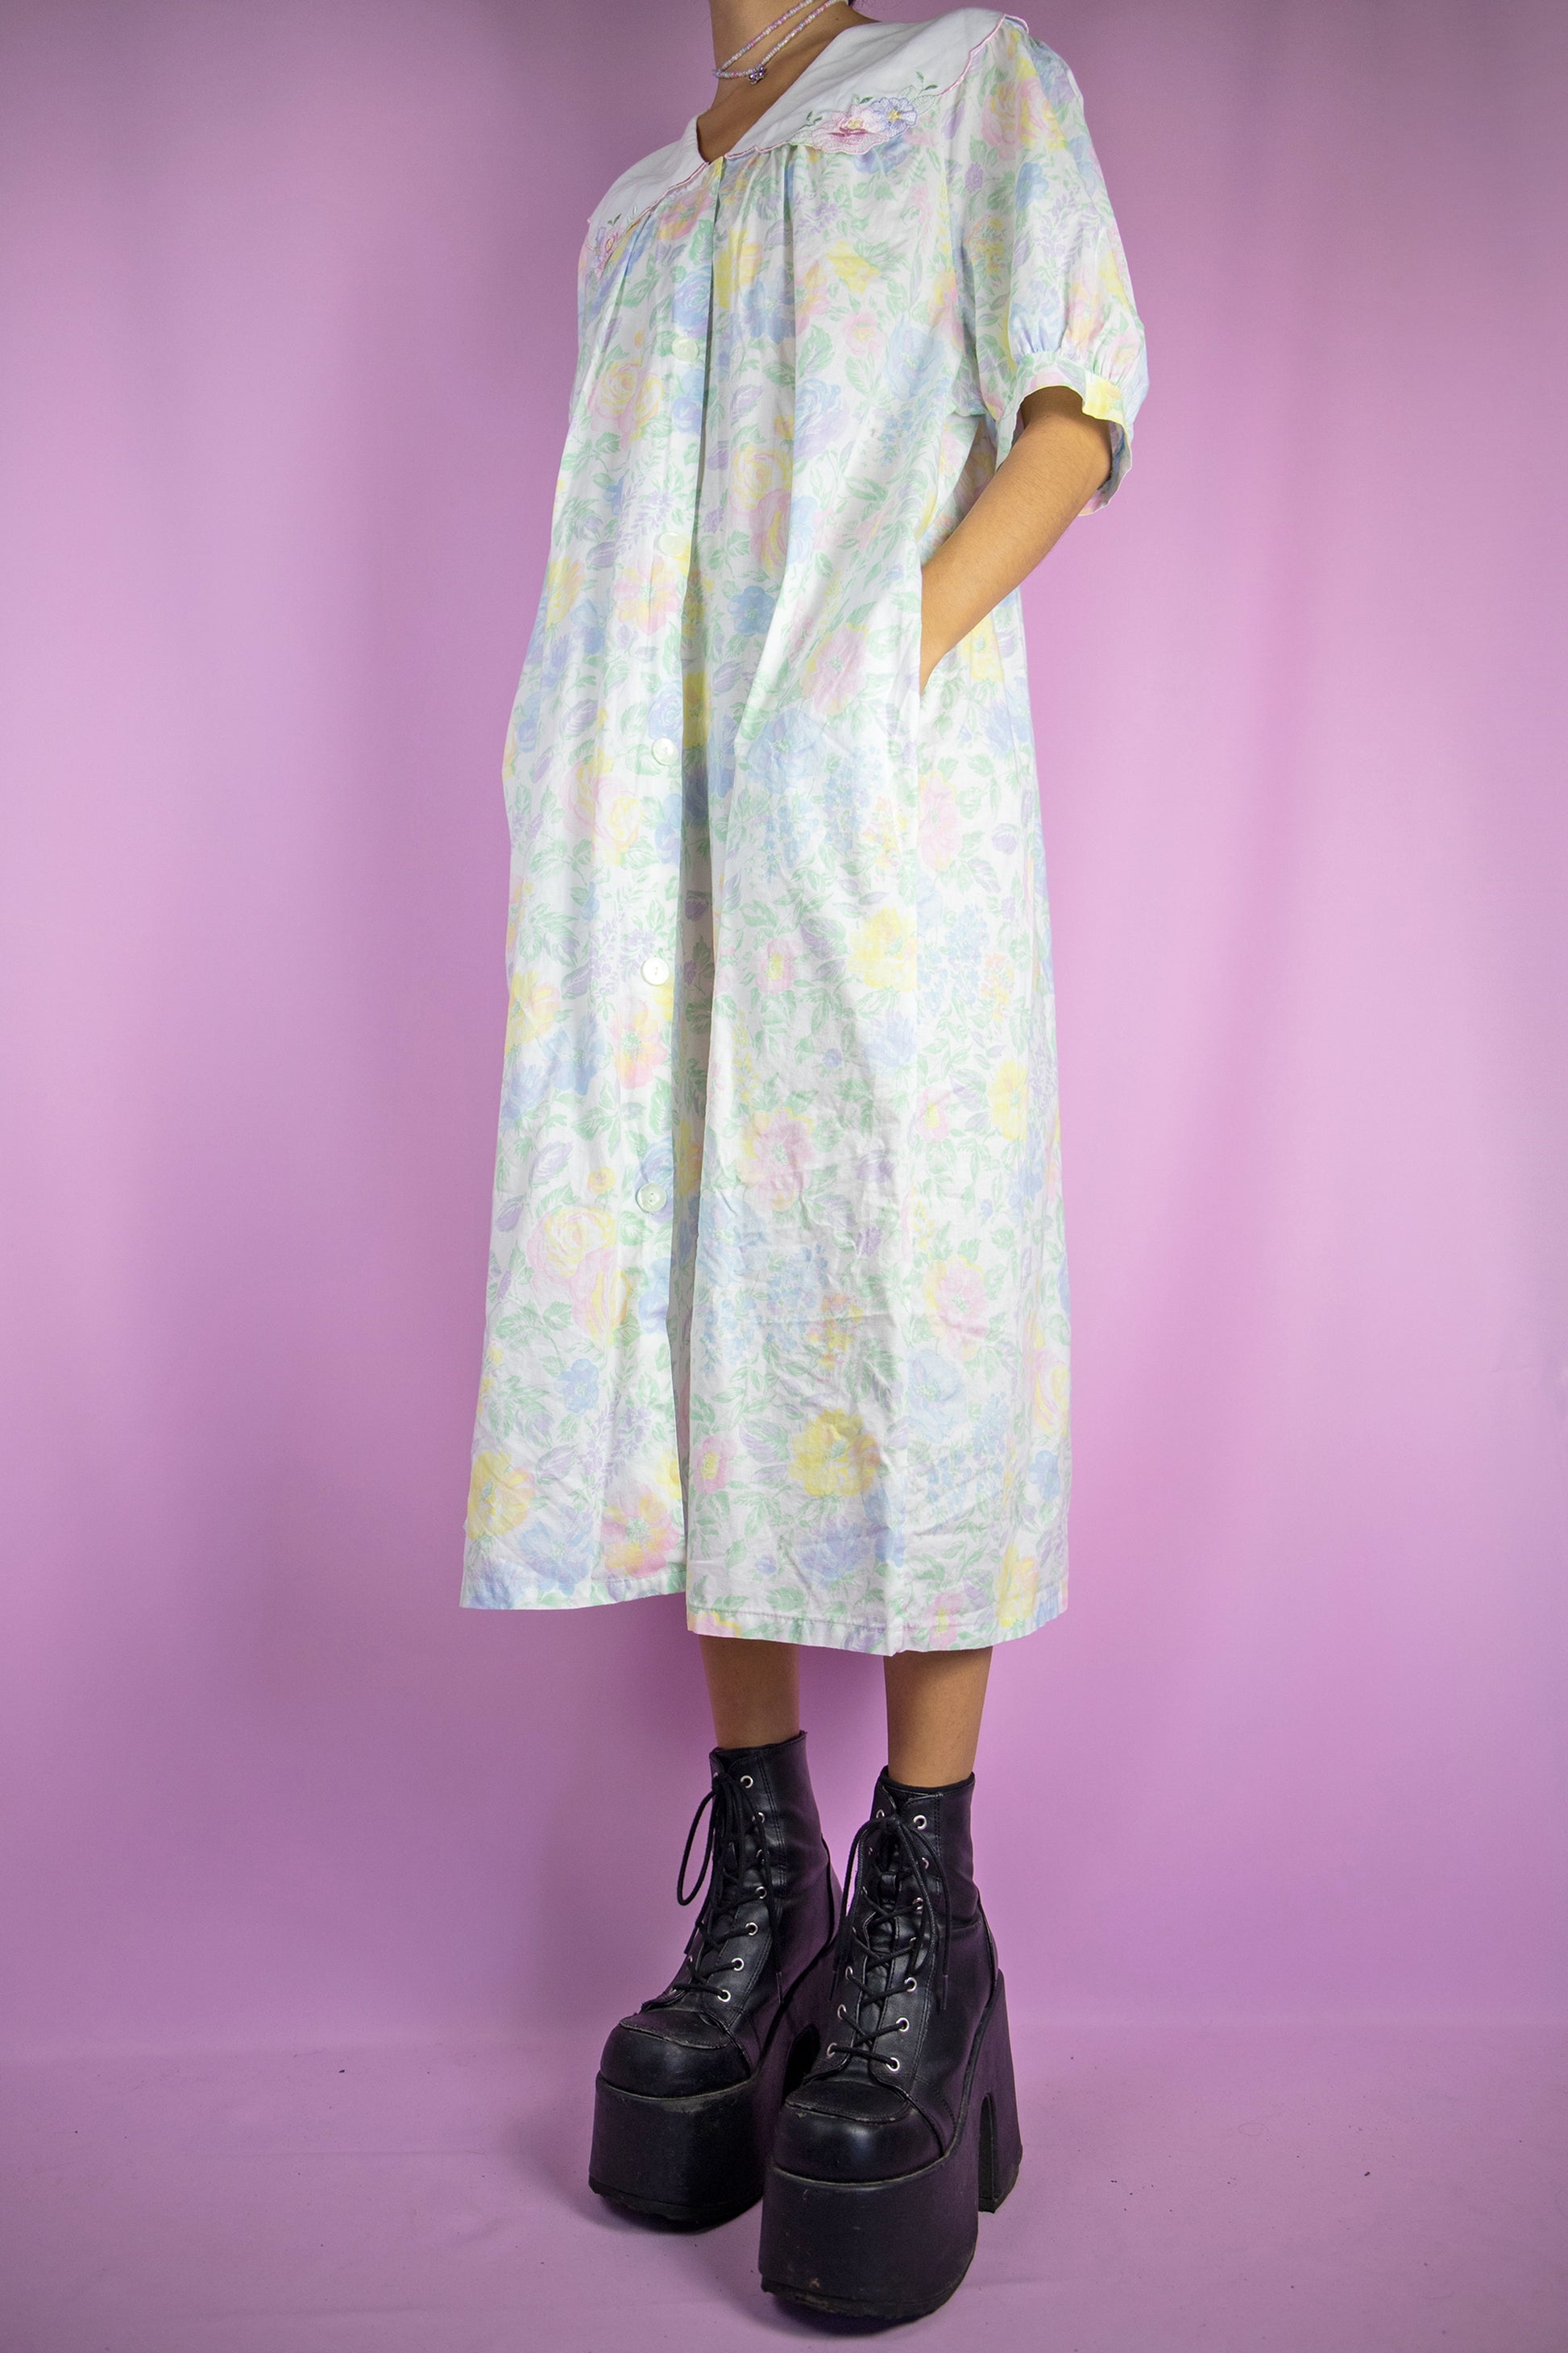 The Vintage 90s Floral Nightgown Dress is a romantic cottagecore-inspired white multicolored printed collared midi night dress lounge sleepwear with short puff sleeves, buttons and pockets.